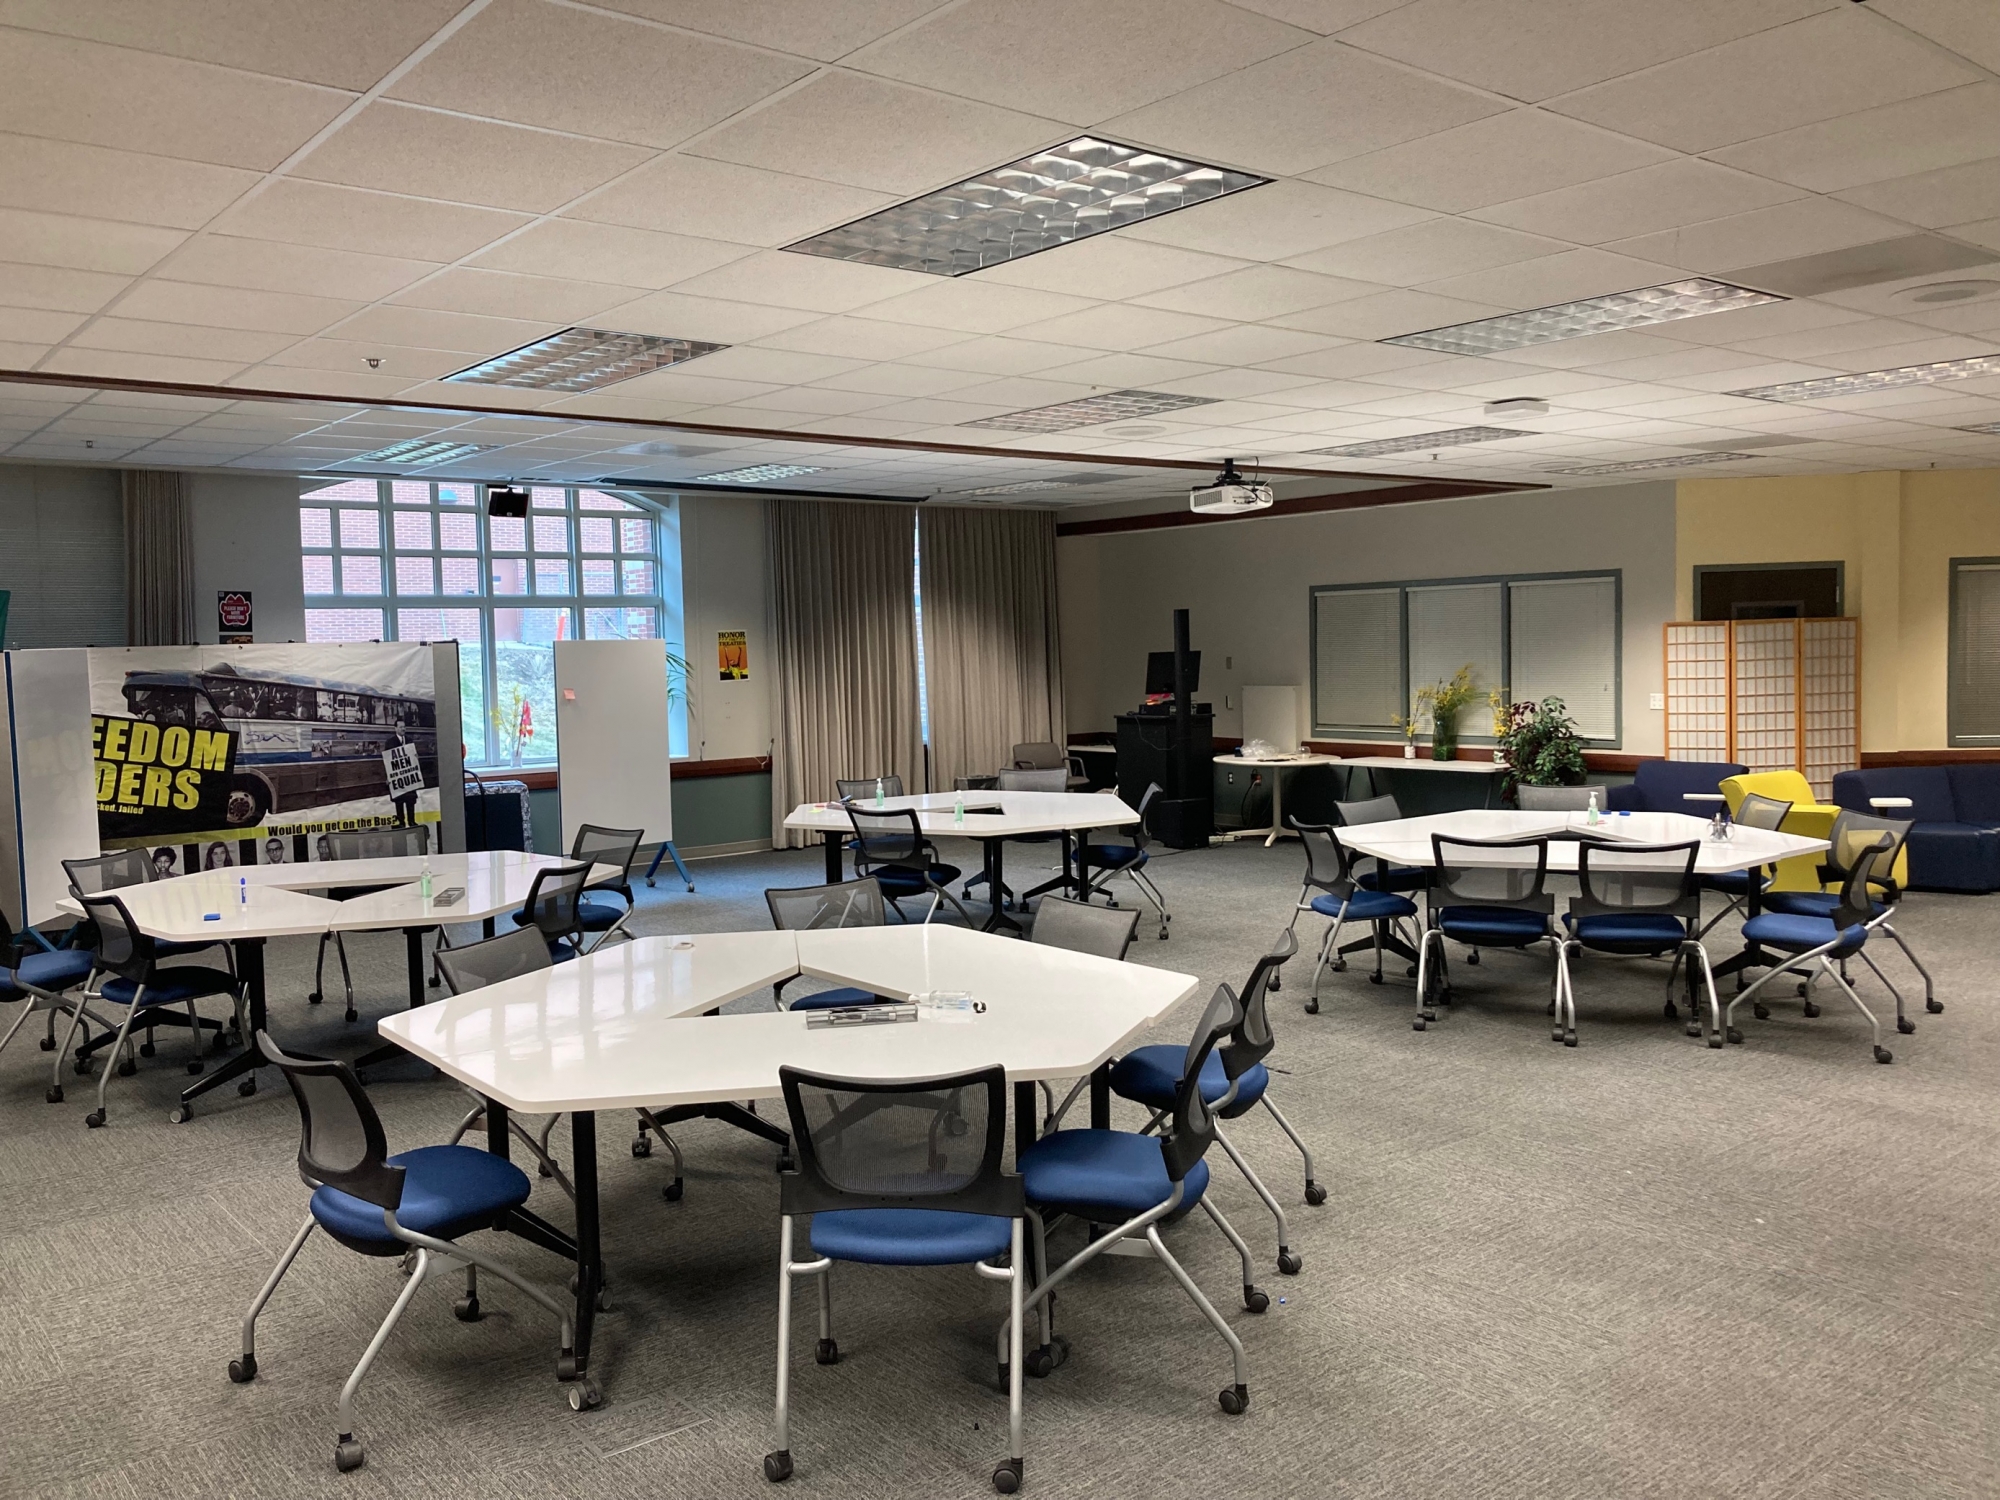 Meeting room layout hexagon tables and whiteboards